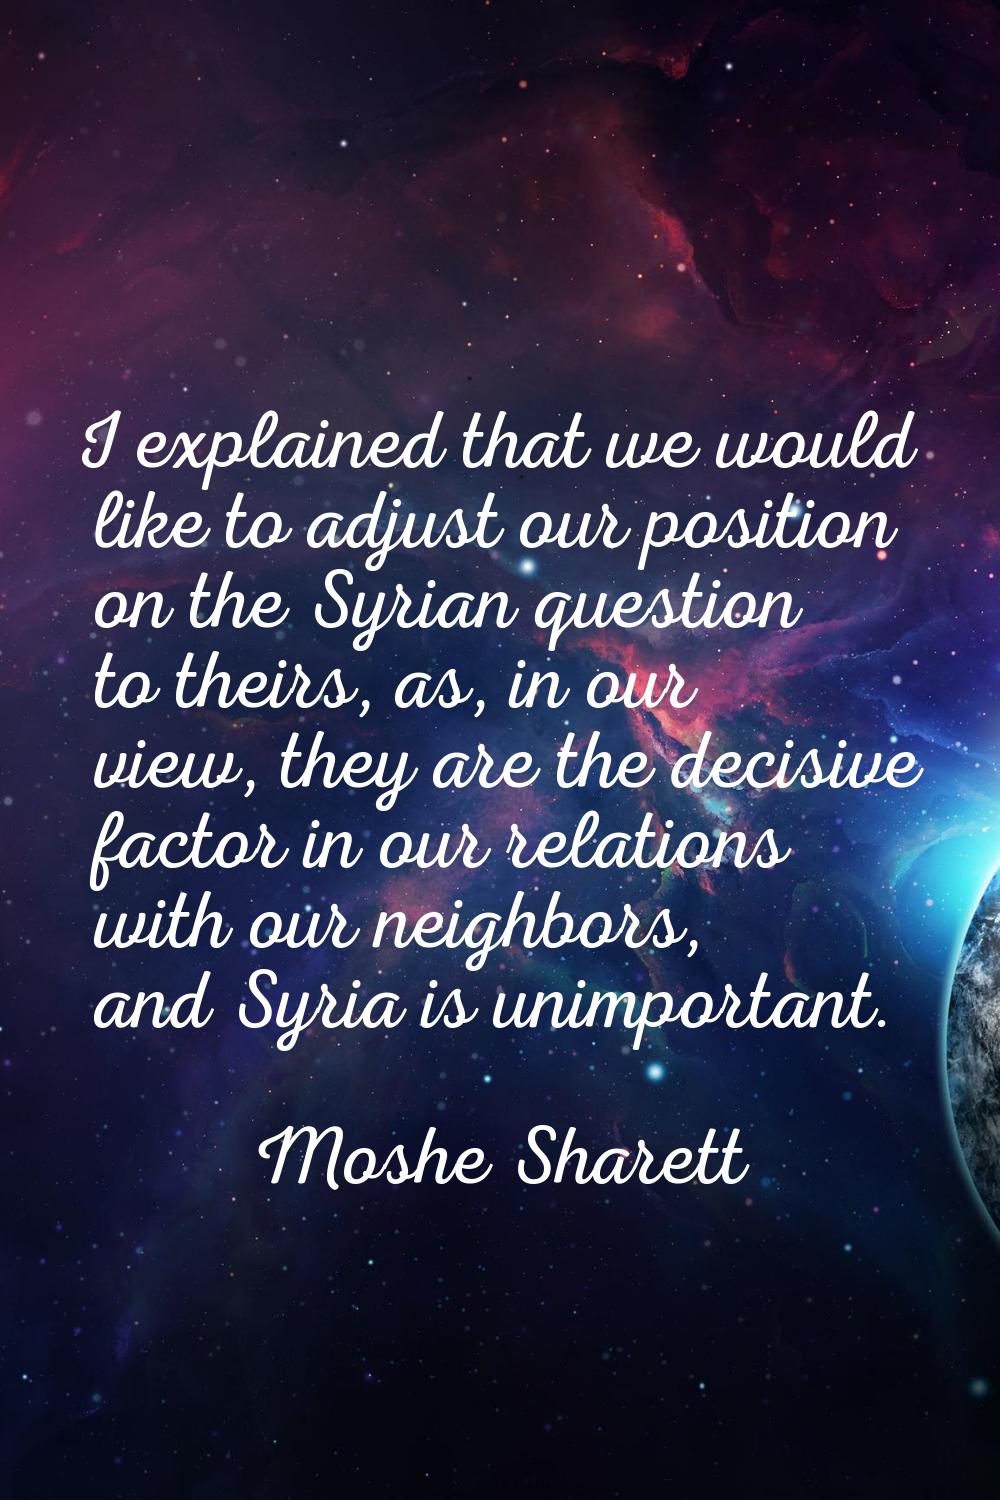 I explained that we would like to adjust our position on the Syrian question to theirs, as, in our 